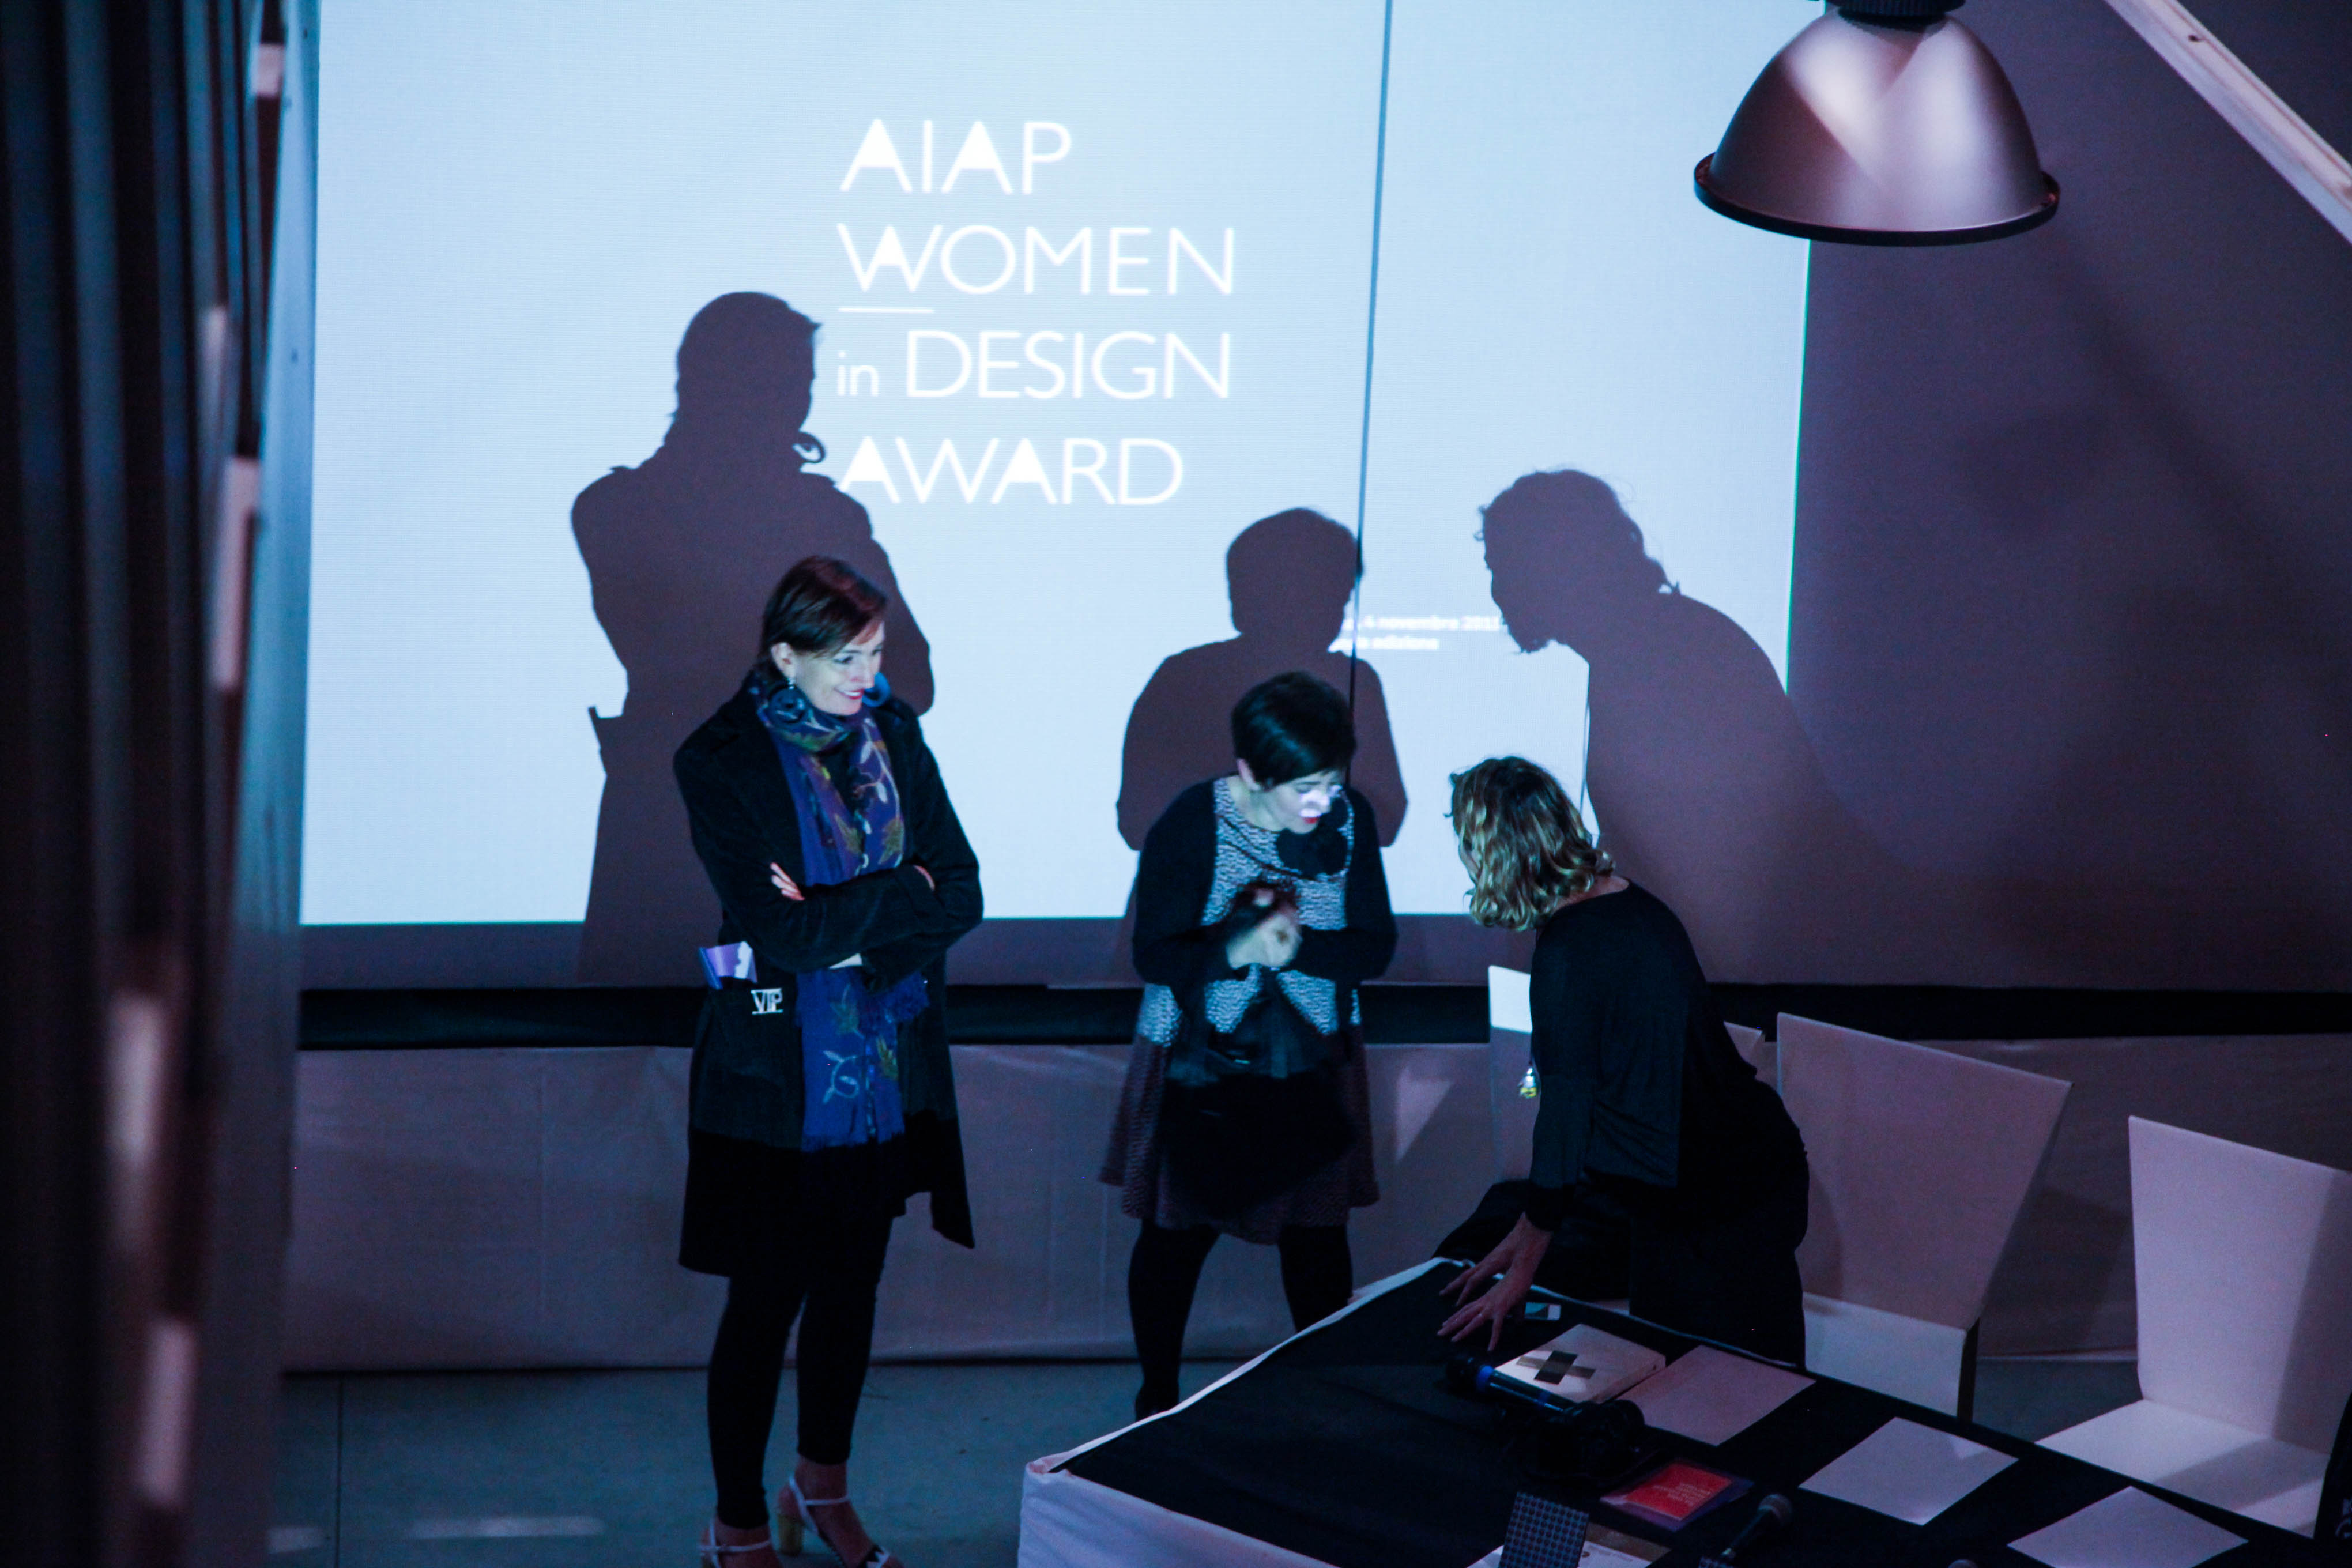 AIAP spearheads design award for women